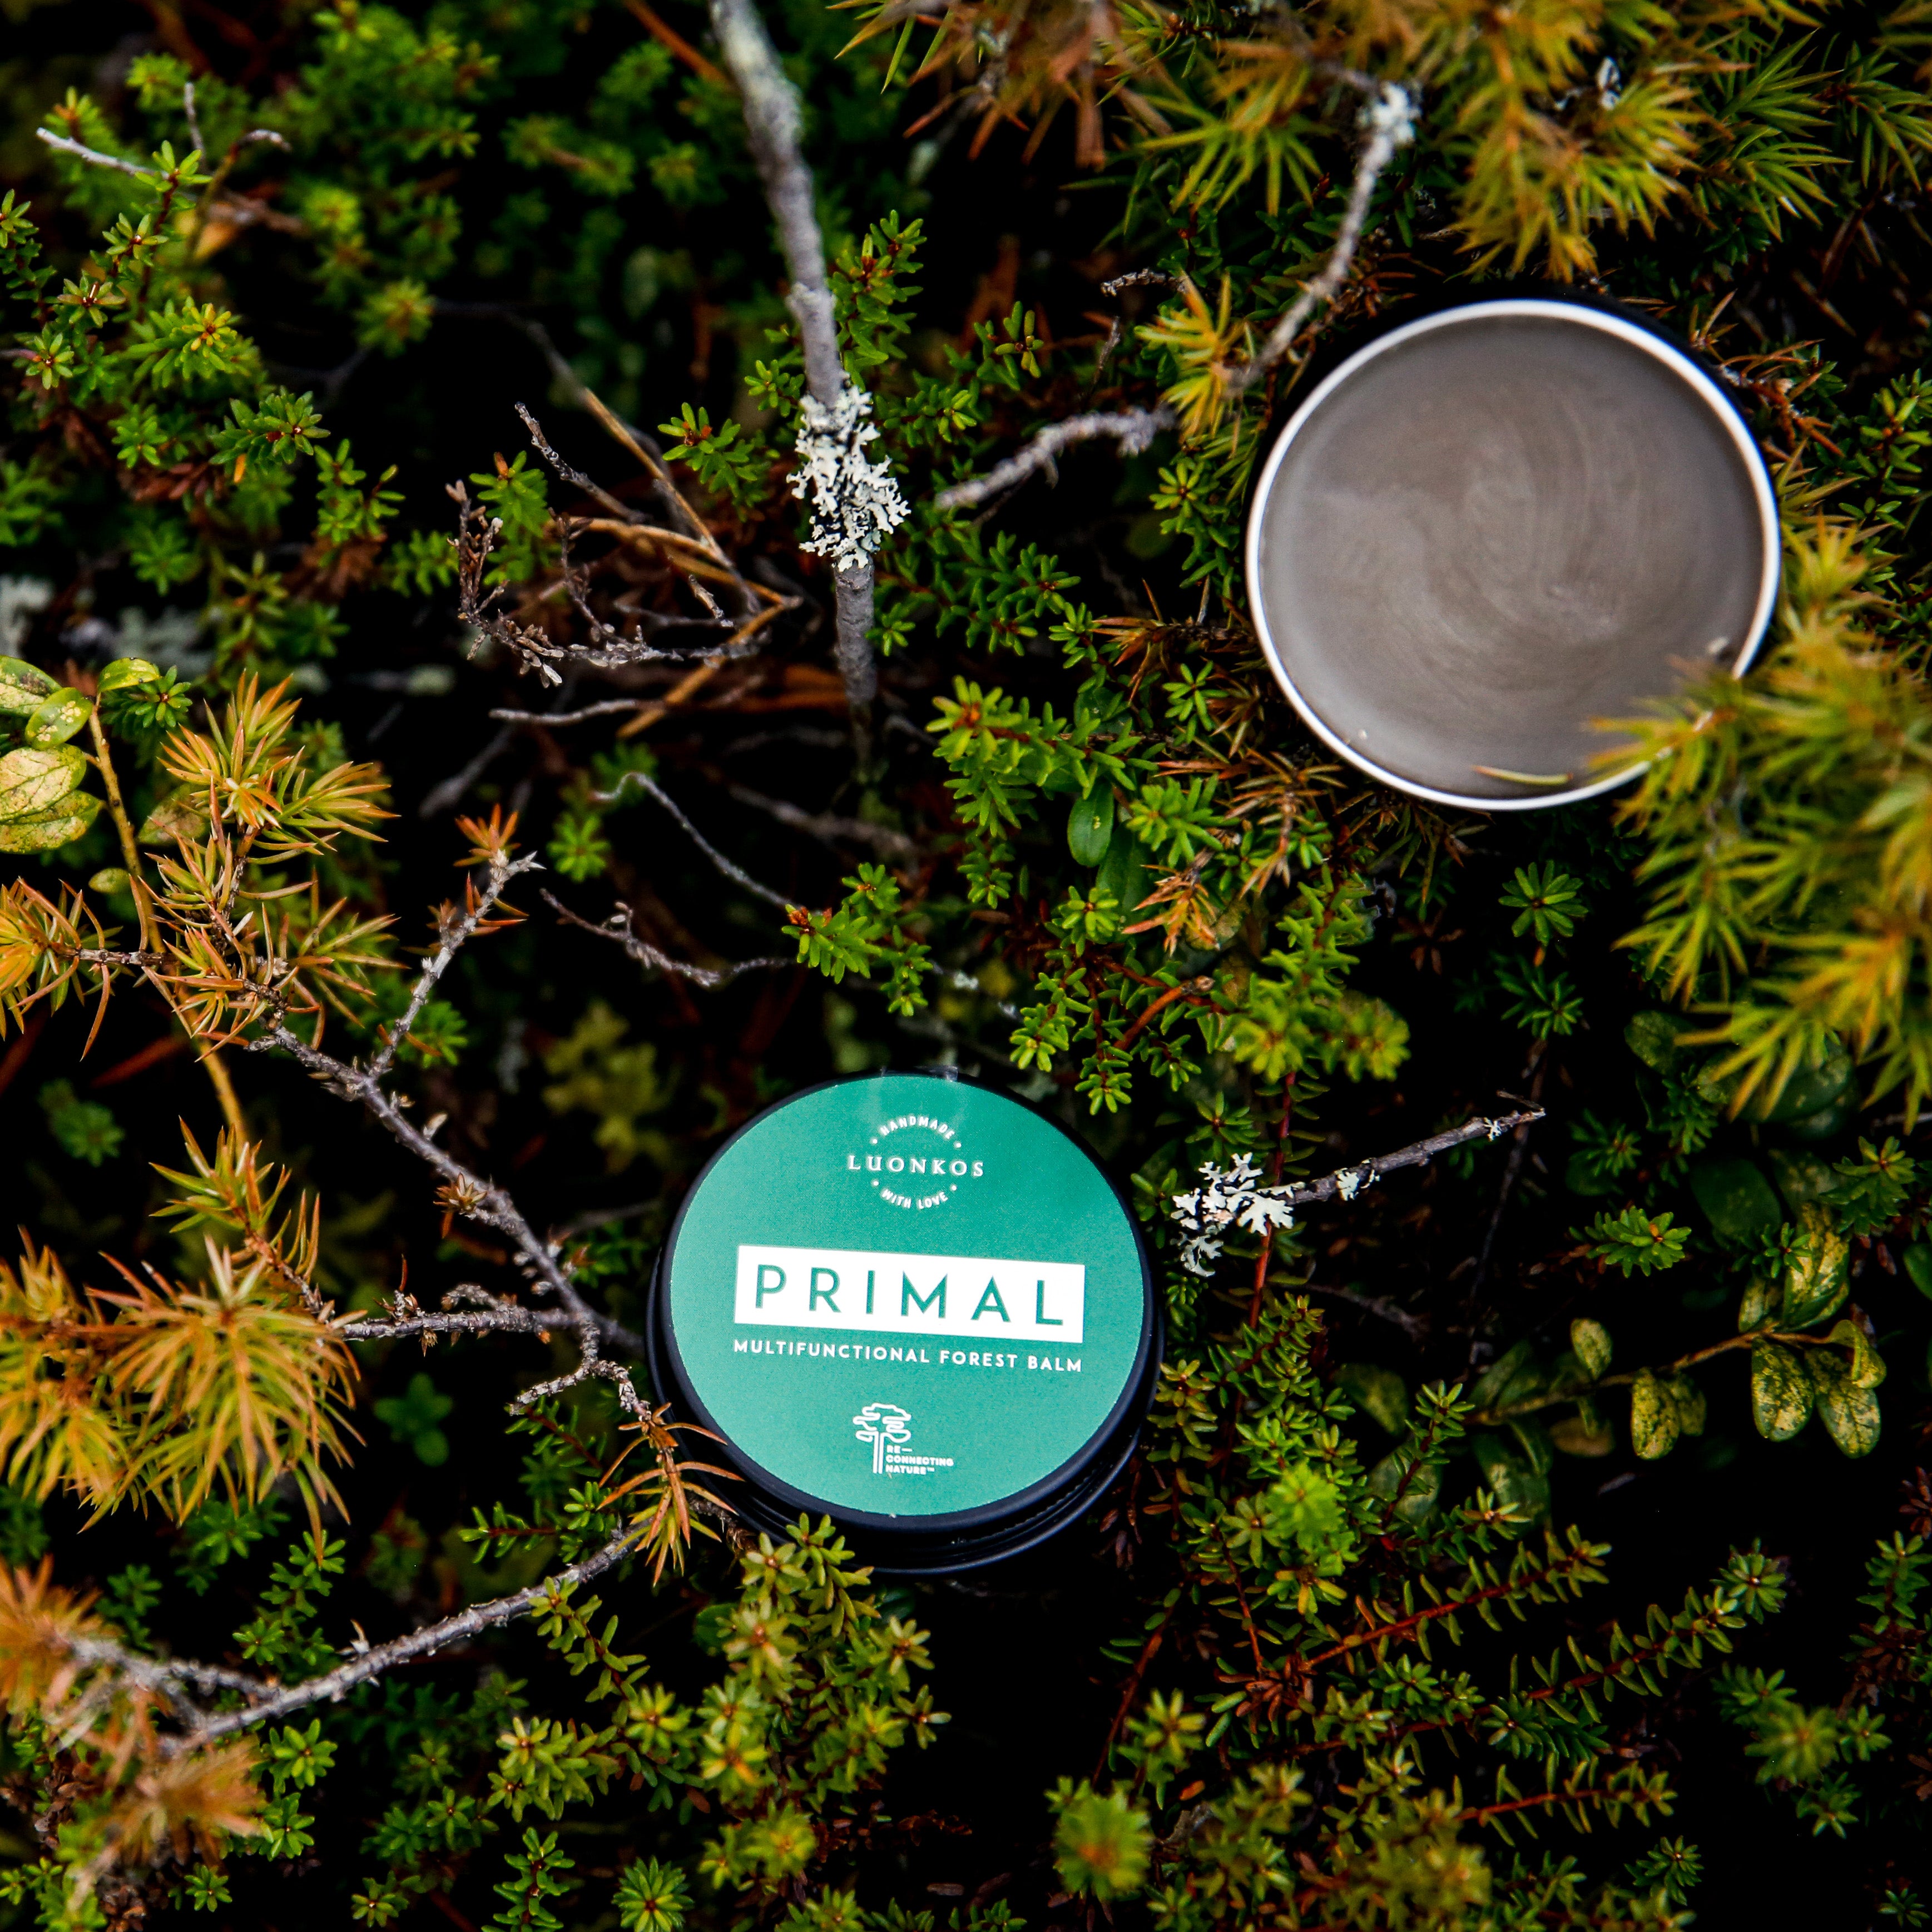 Discover the Magic of Primal Multifunctional Forest Balm